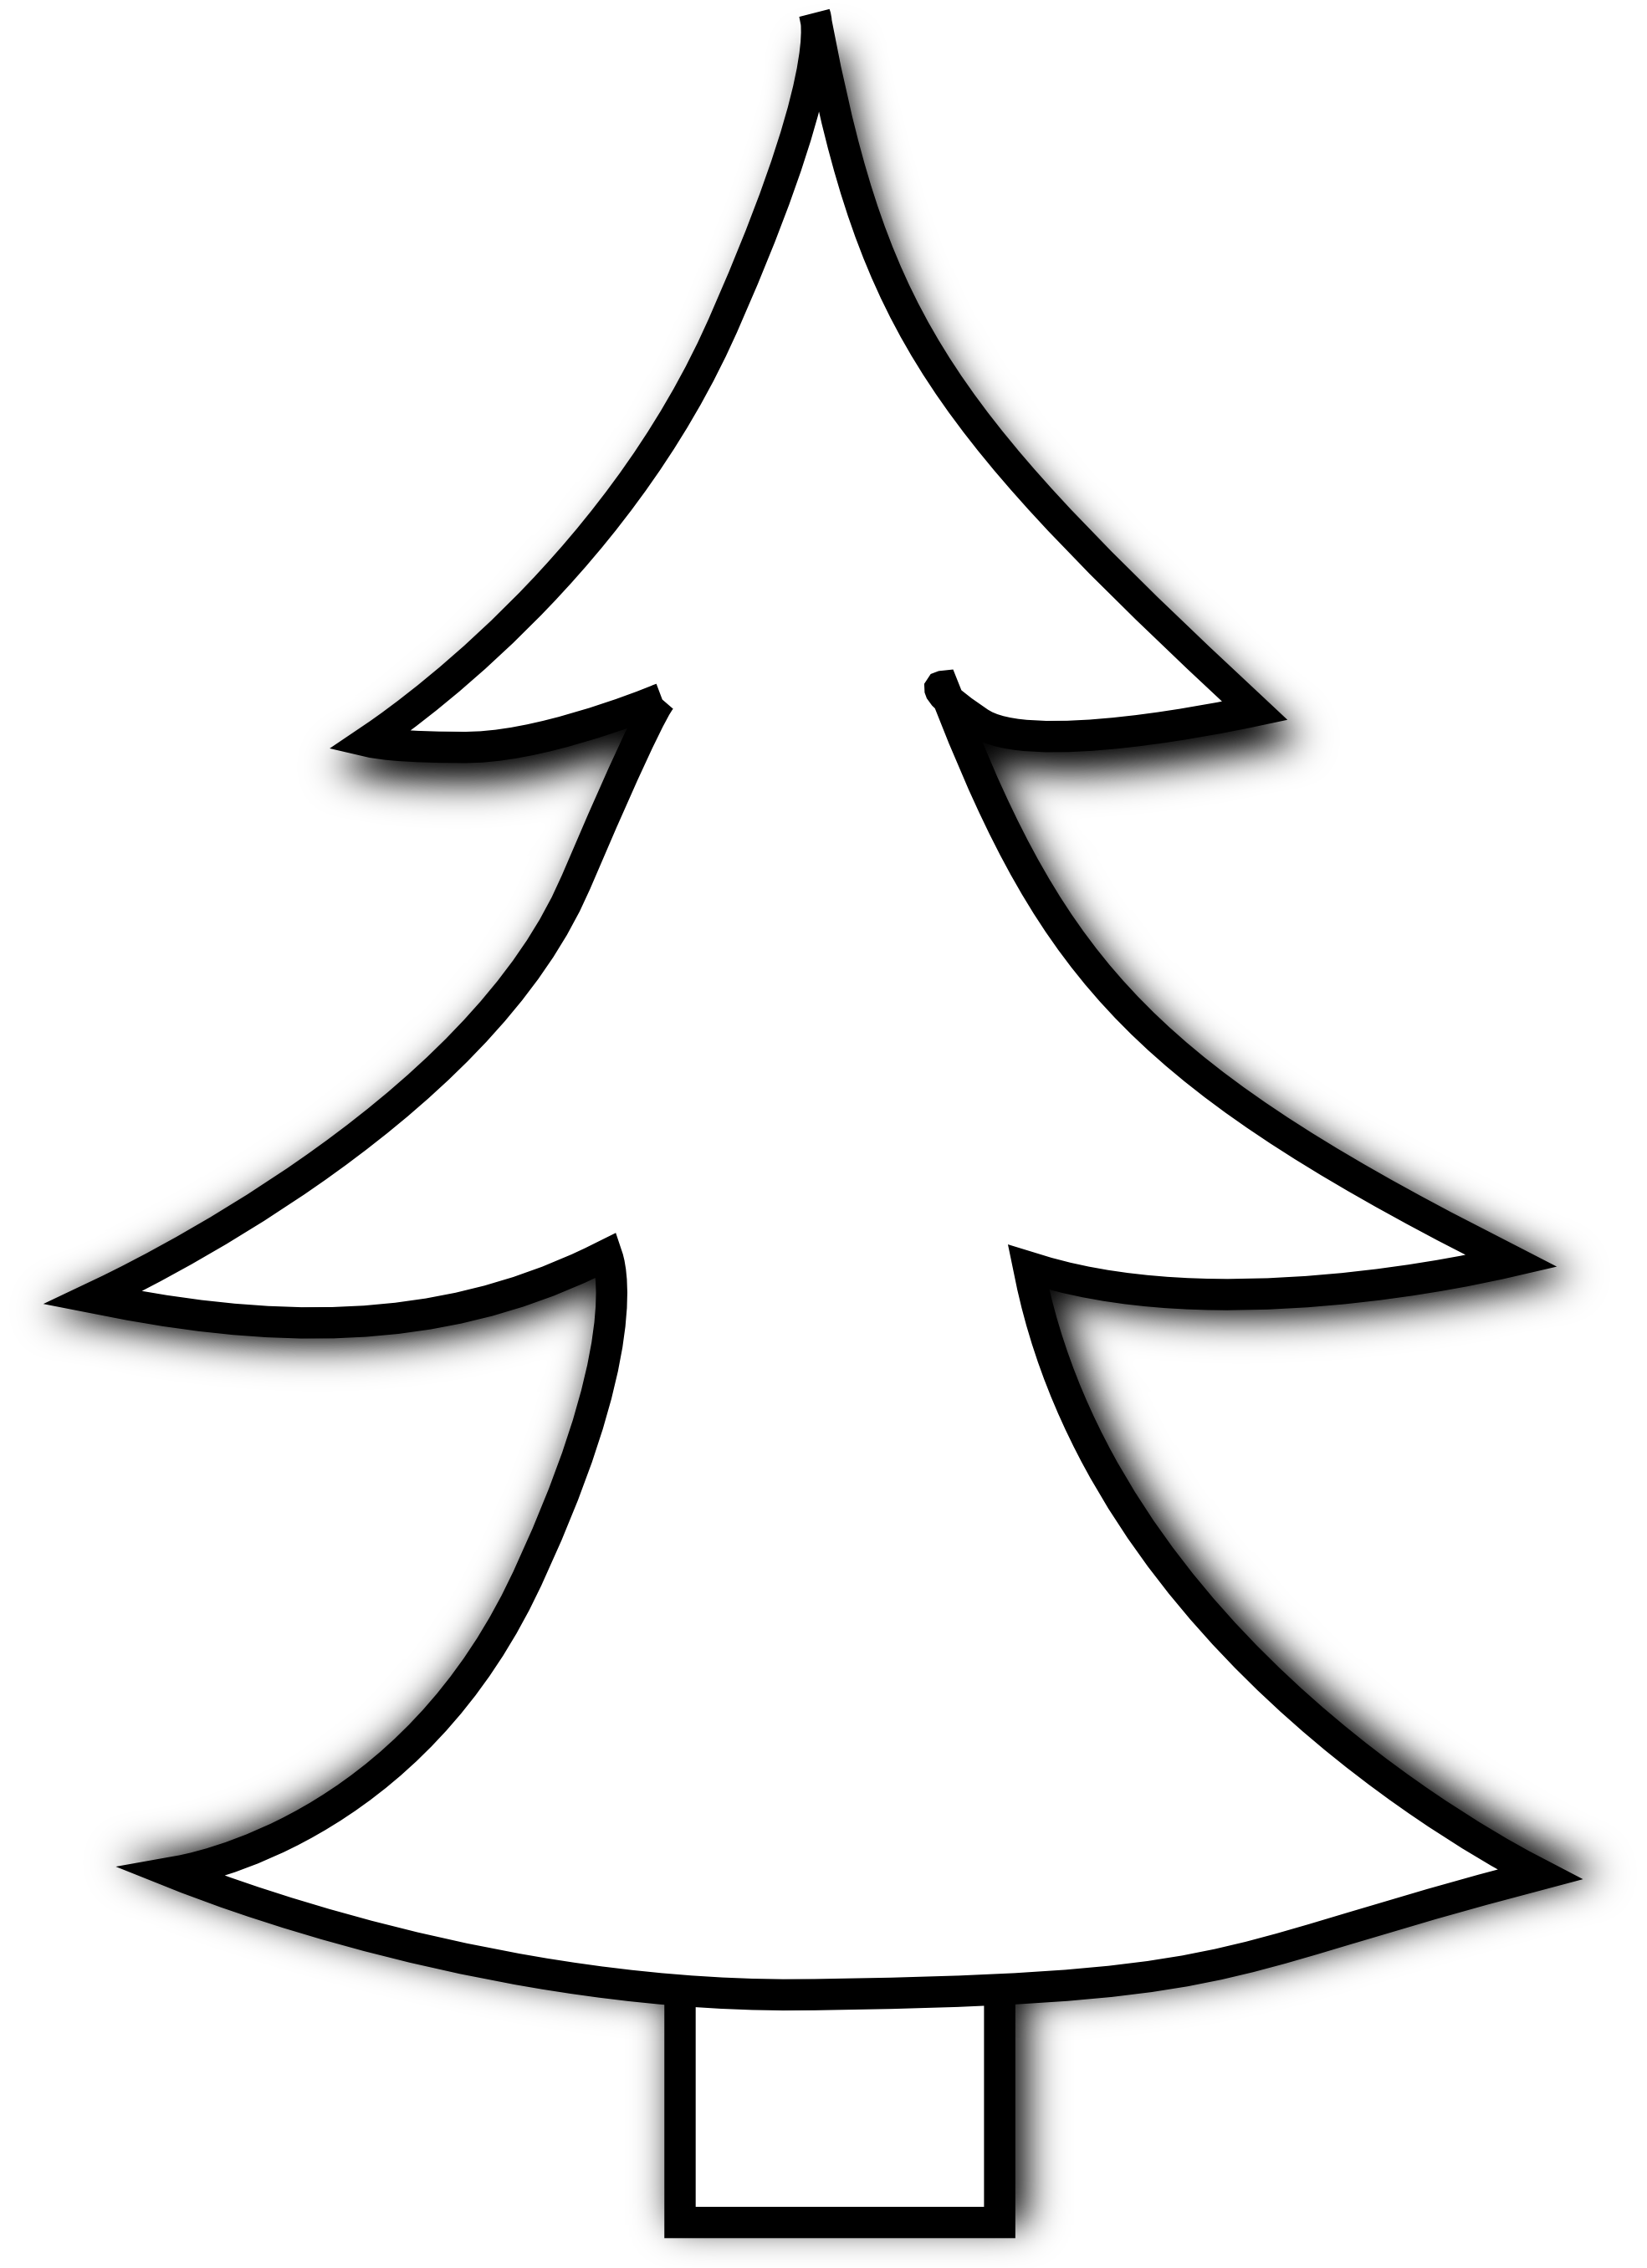 Black And White Christmas Tree - ClipArt Best